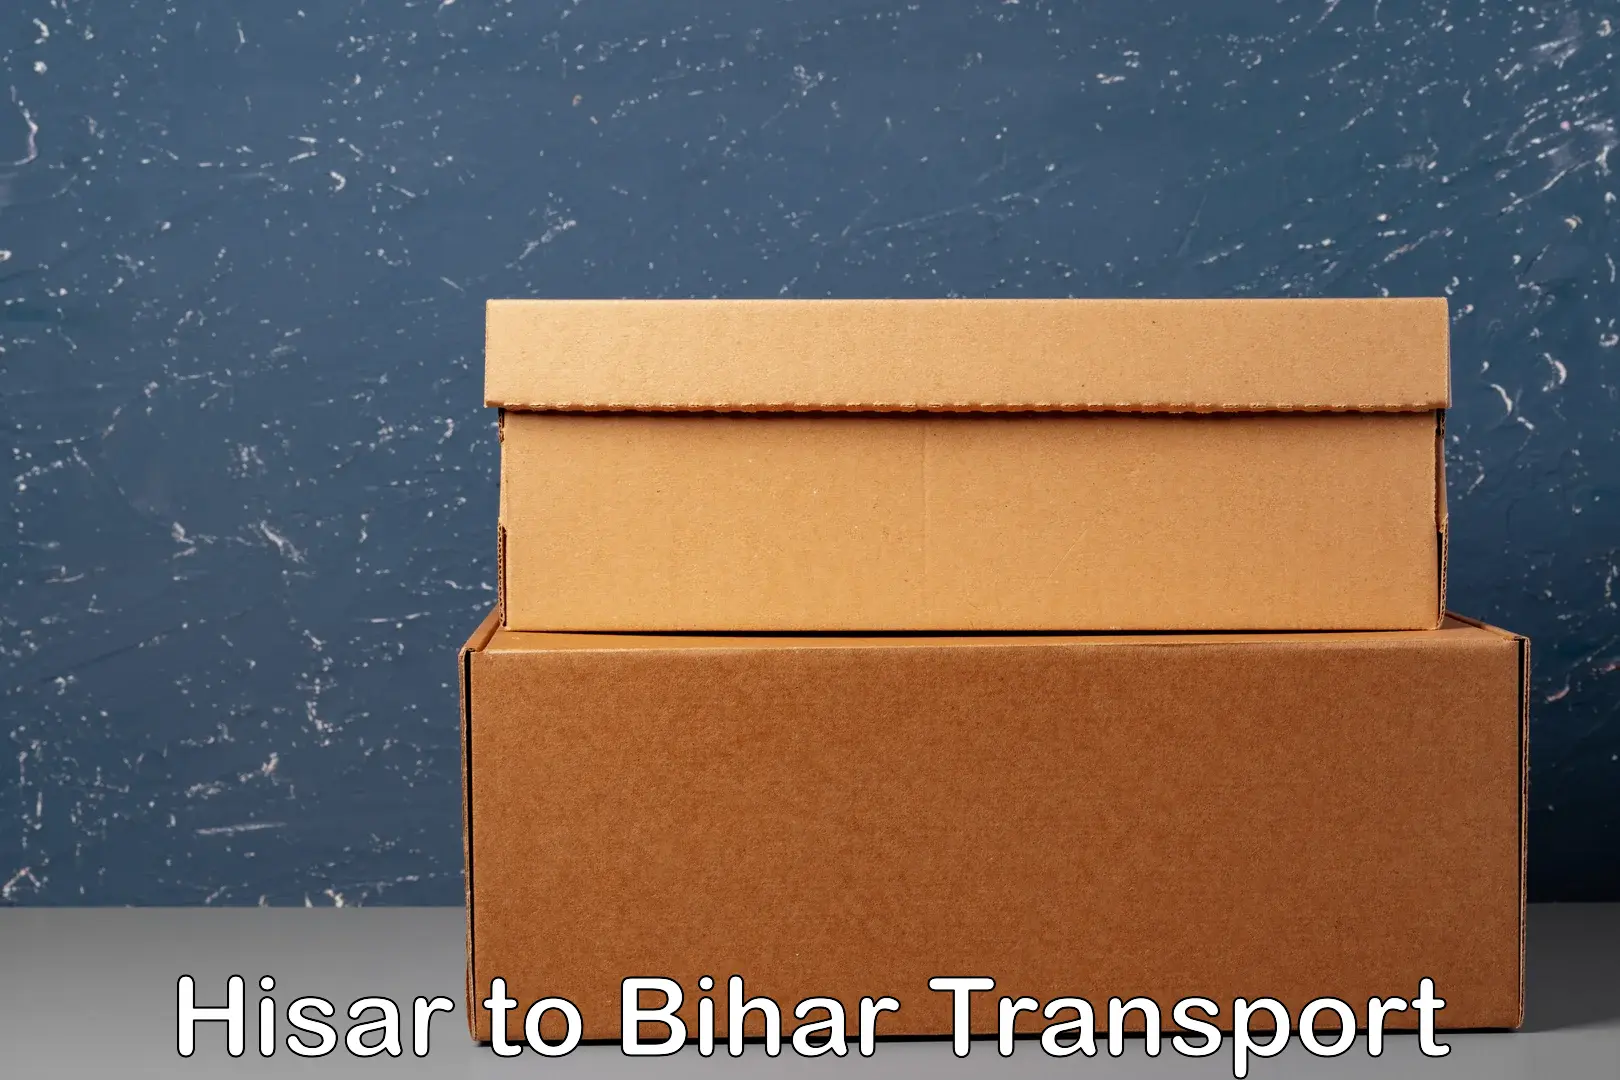 Truck transport companies in India Hisar to Patna